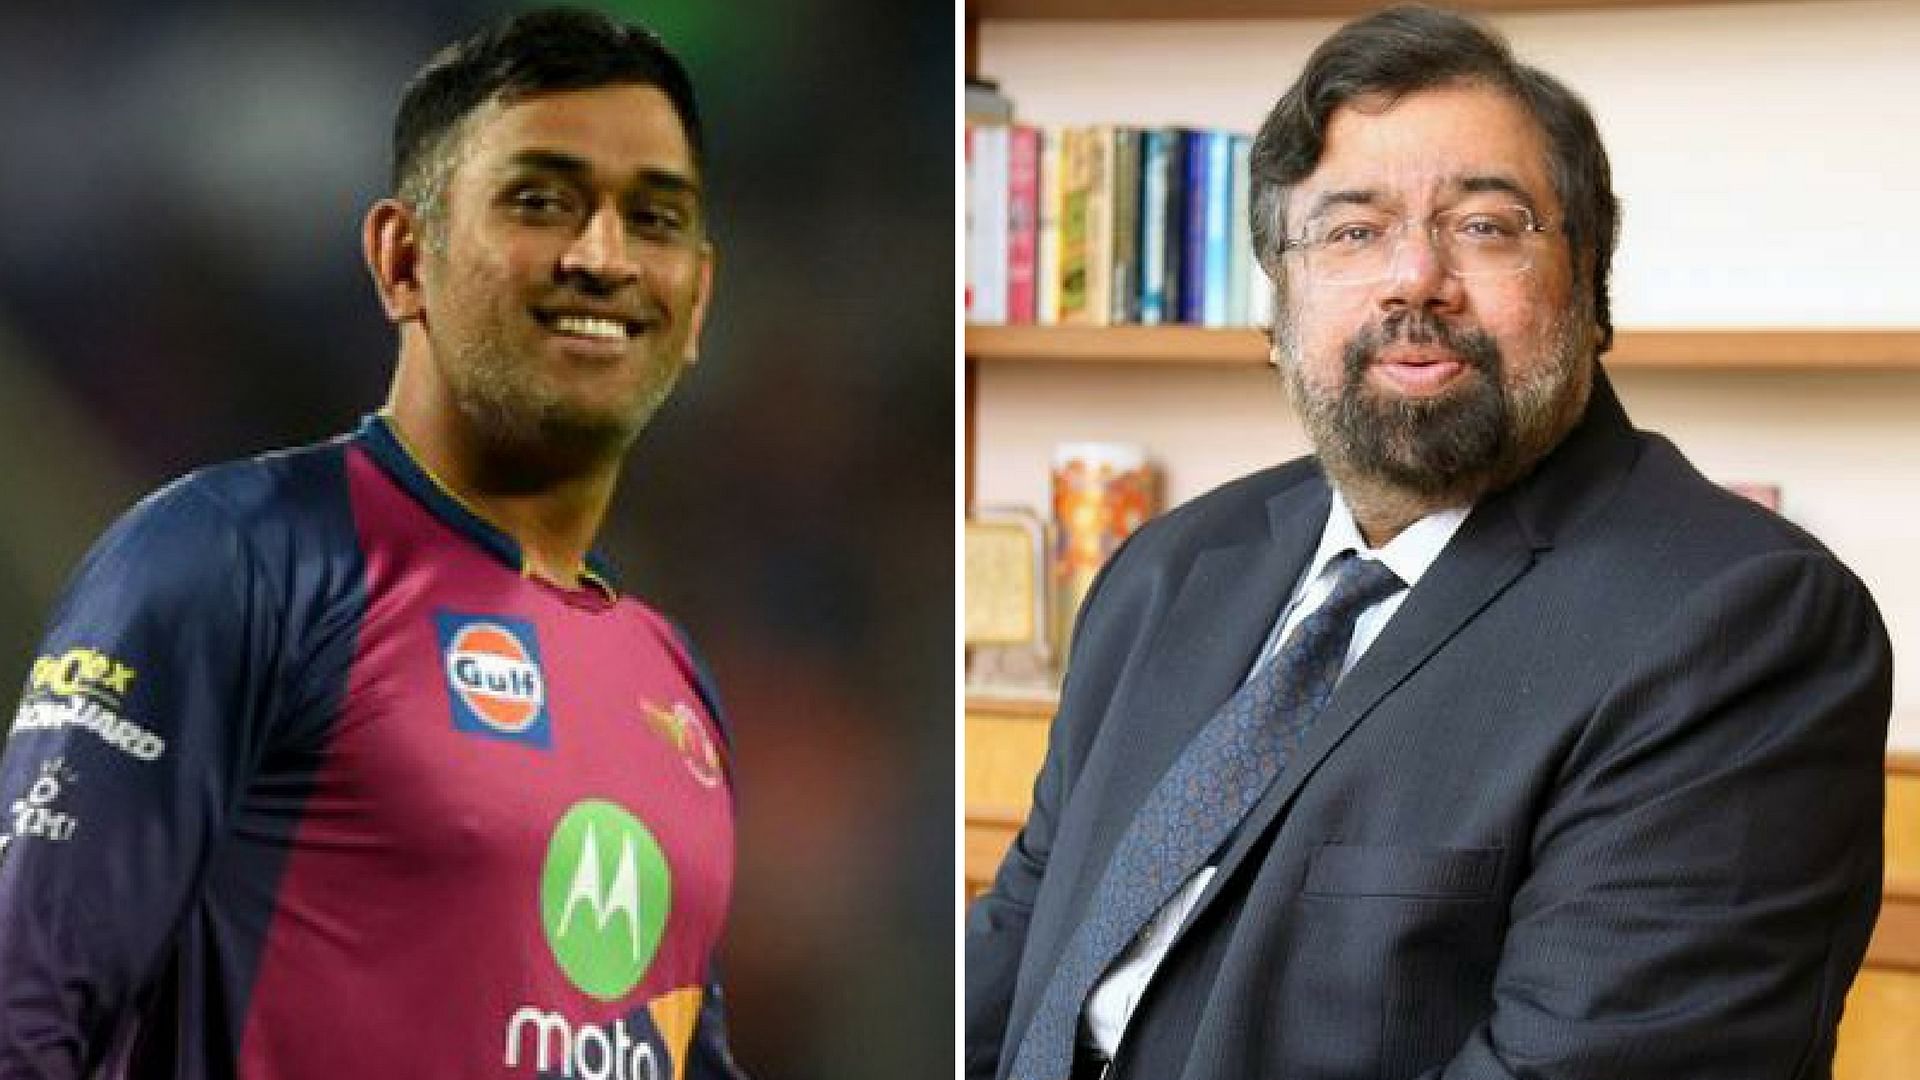 After Pune’s loss, some die-hard RPS and Mahendra Singh Dhoni fans took to Twitter to troll Harsh Goenka. (Photo: <b>The Quint</b>)